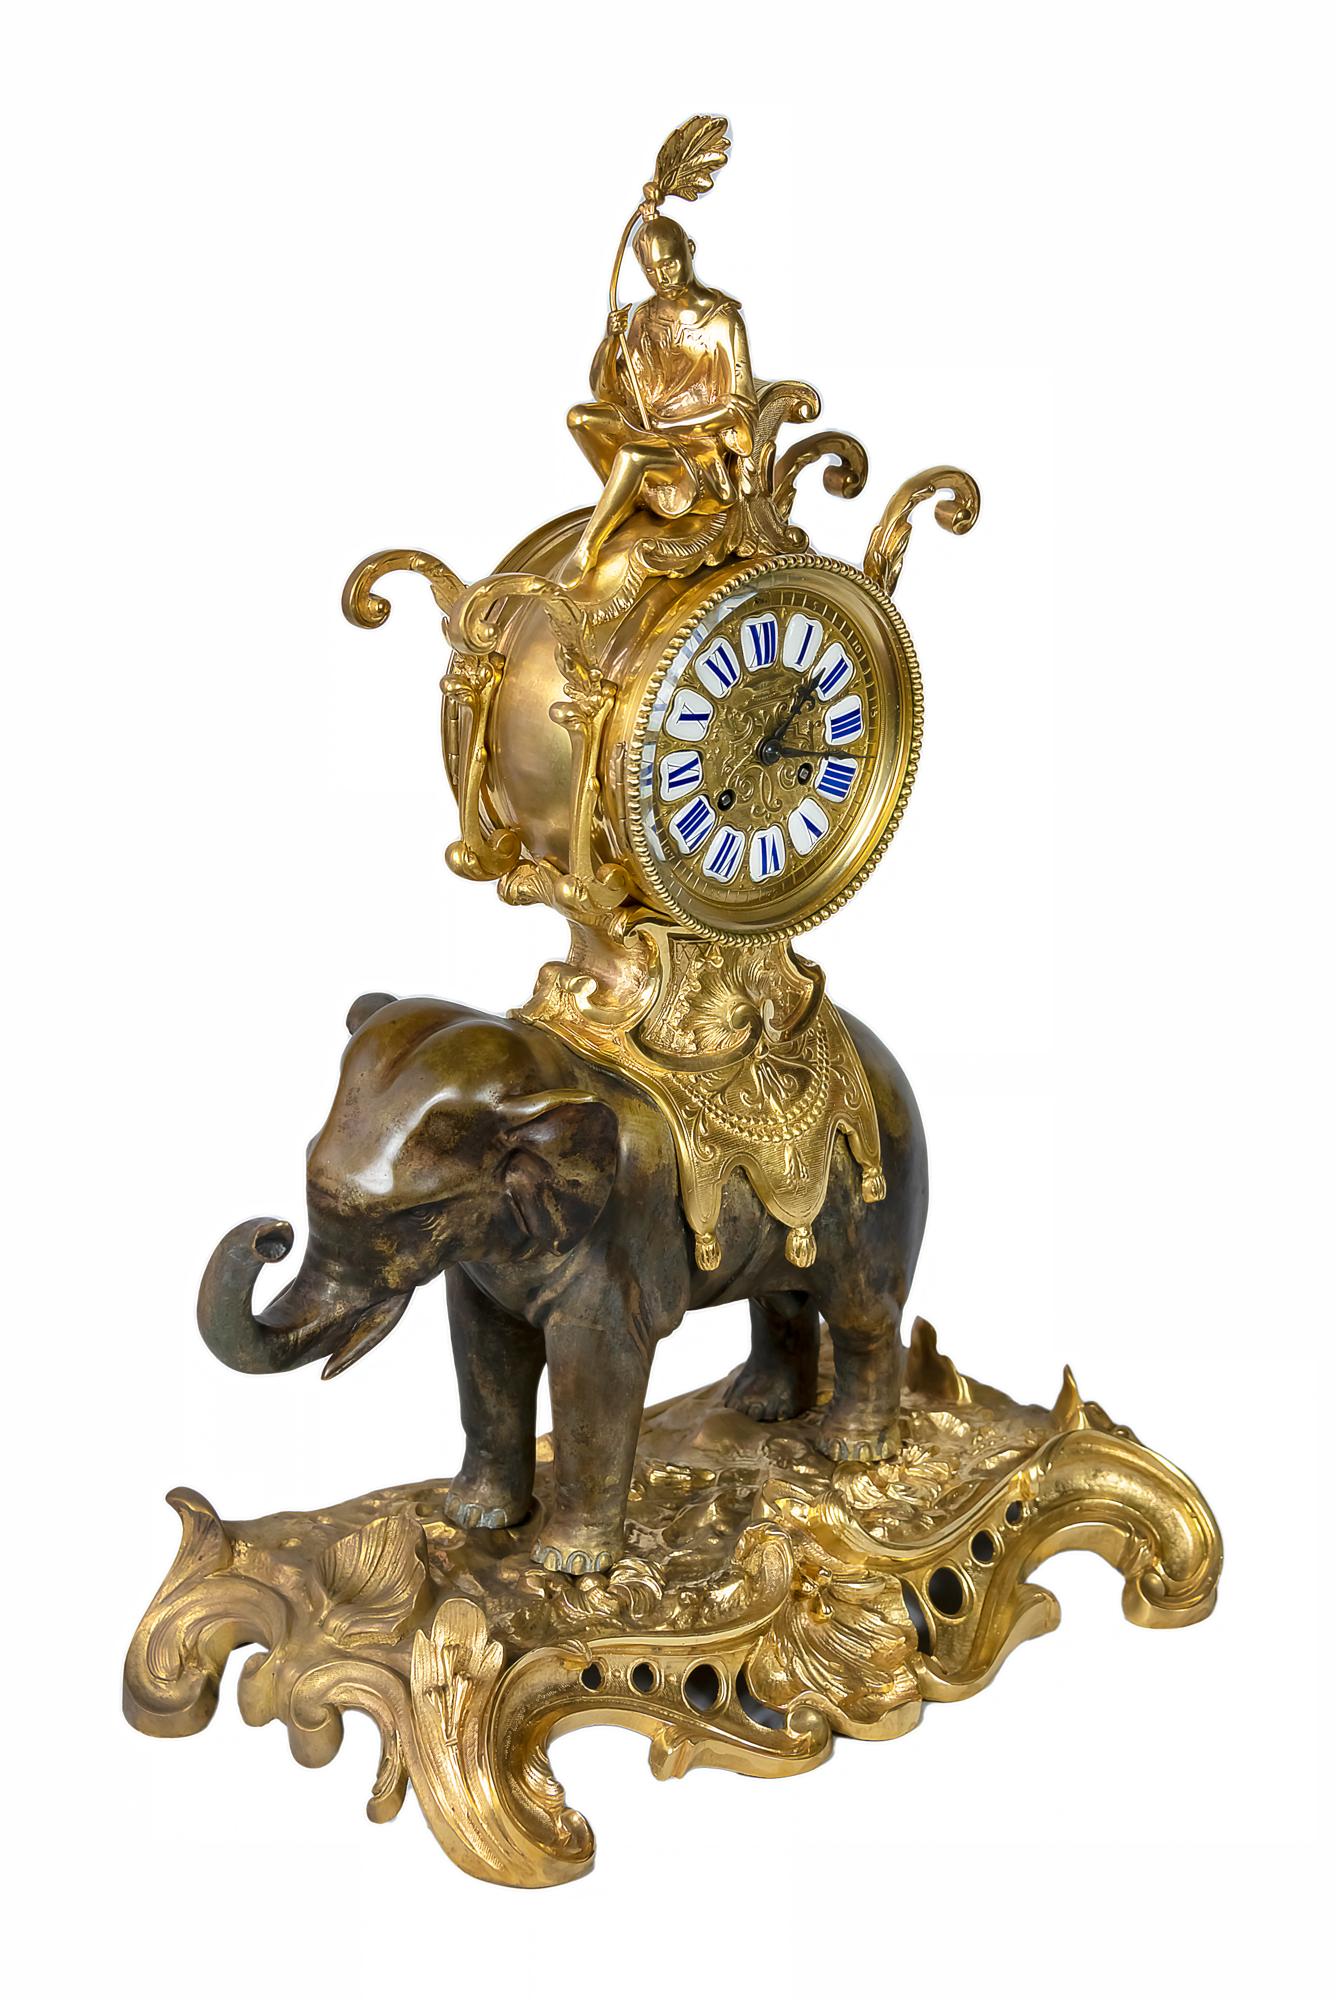 French 19th century Louis XV stile gilded bronze mantel clock created in the manner of Chinoiserie.
The base is in gilt bronze with the patinated bronze sculpture of an Asian elephant carrying saddle with sitting Chinese man in it. 
The dial is